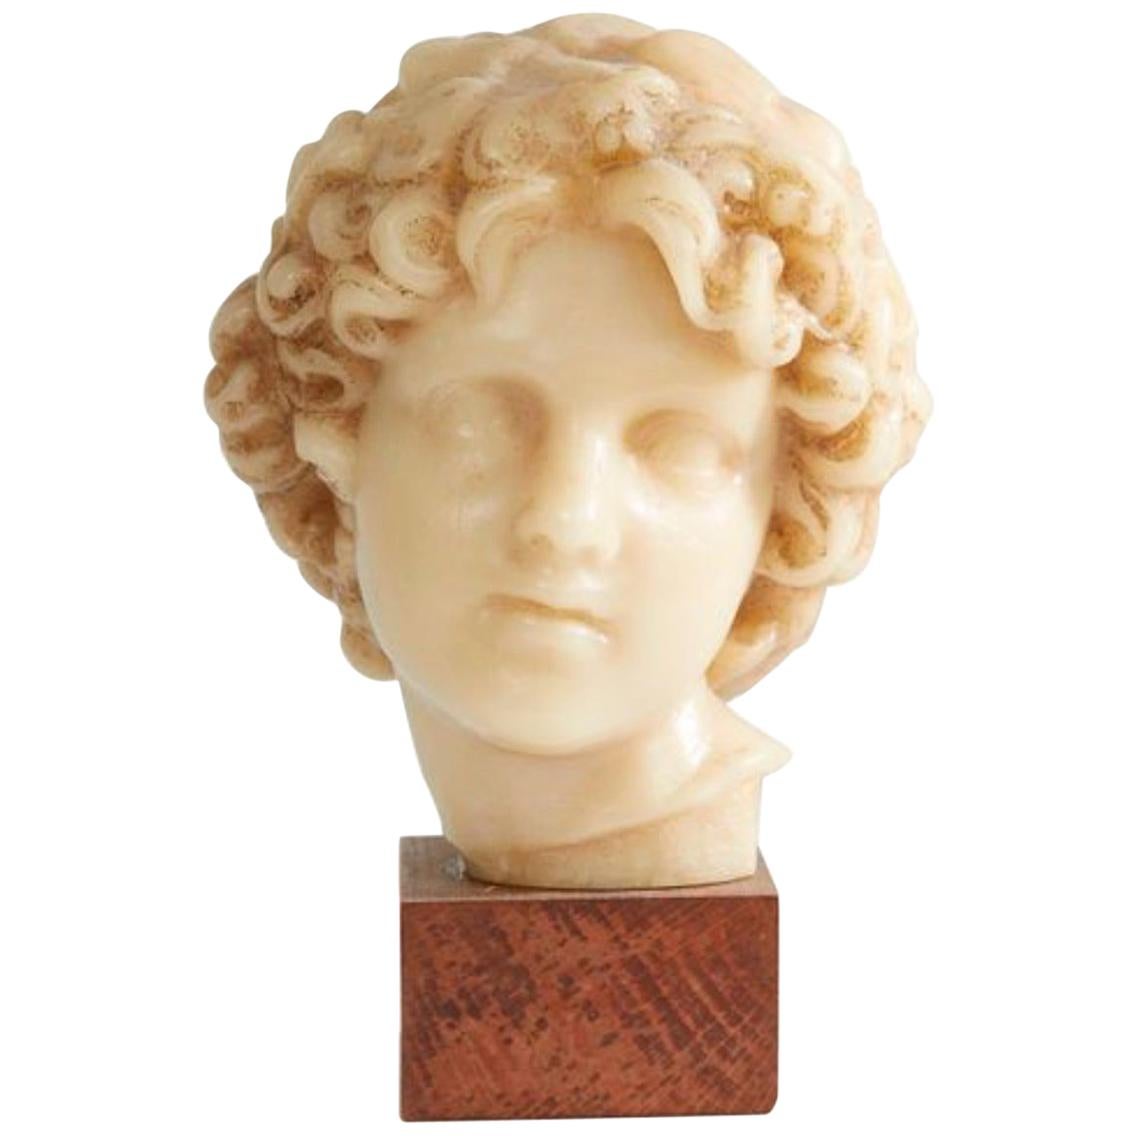 20th Century French Sculpture of a Child's Head